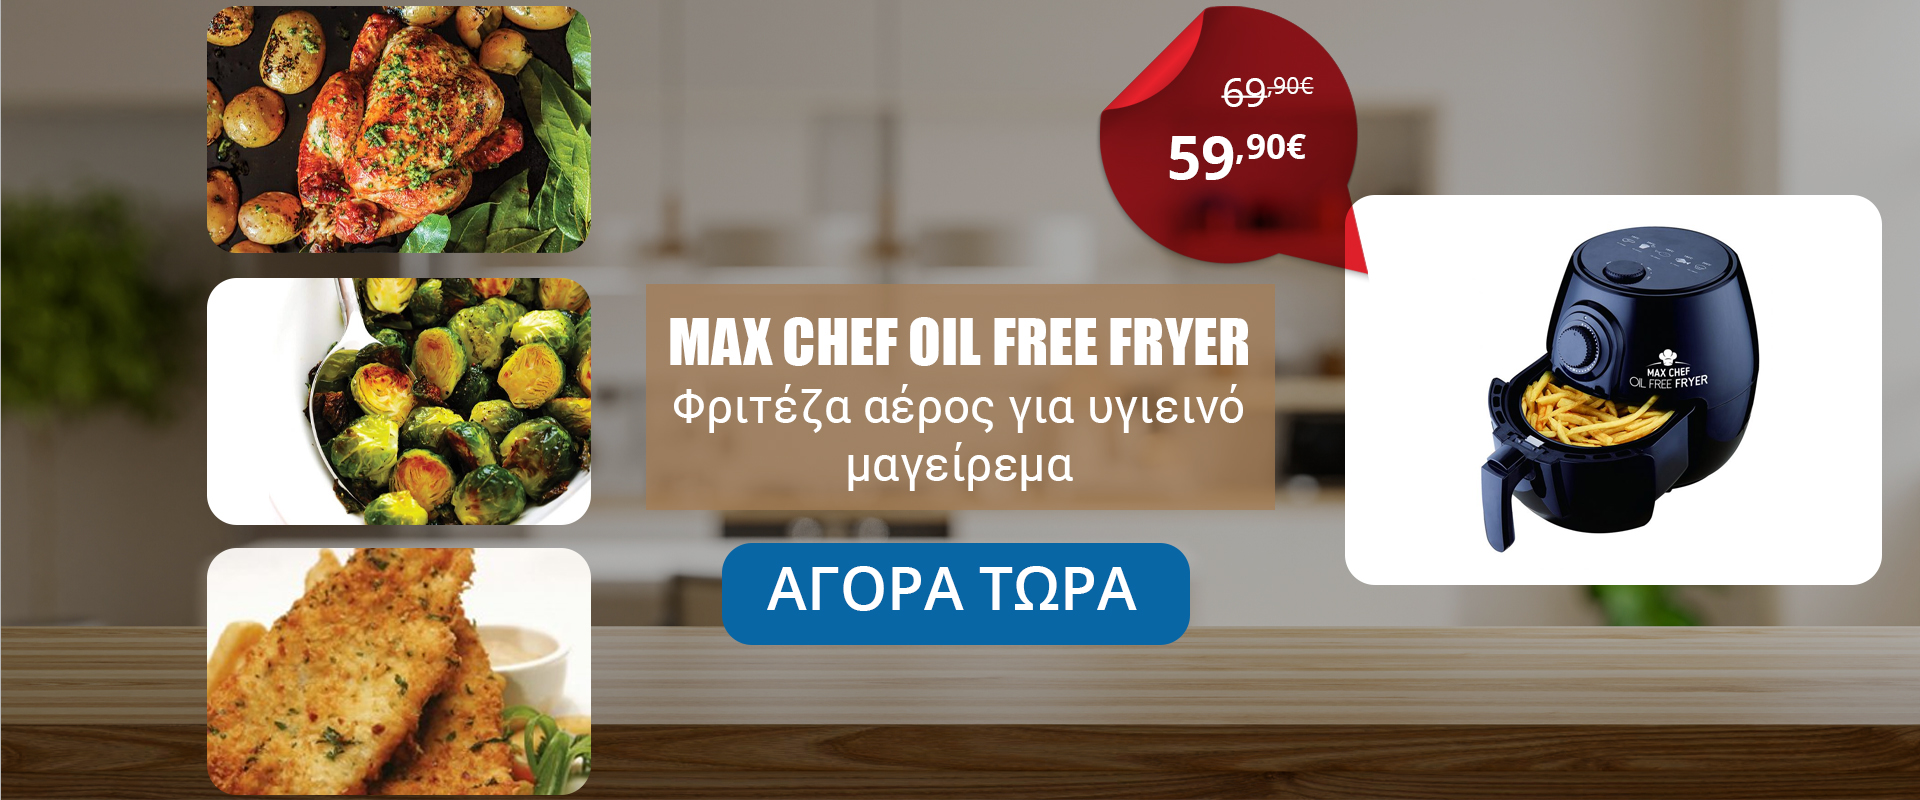 Max Chef Oil Free Fryer